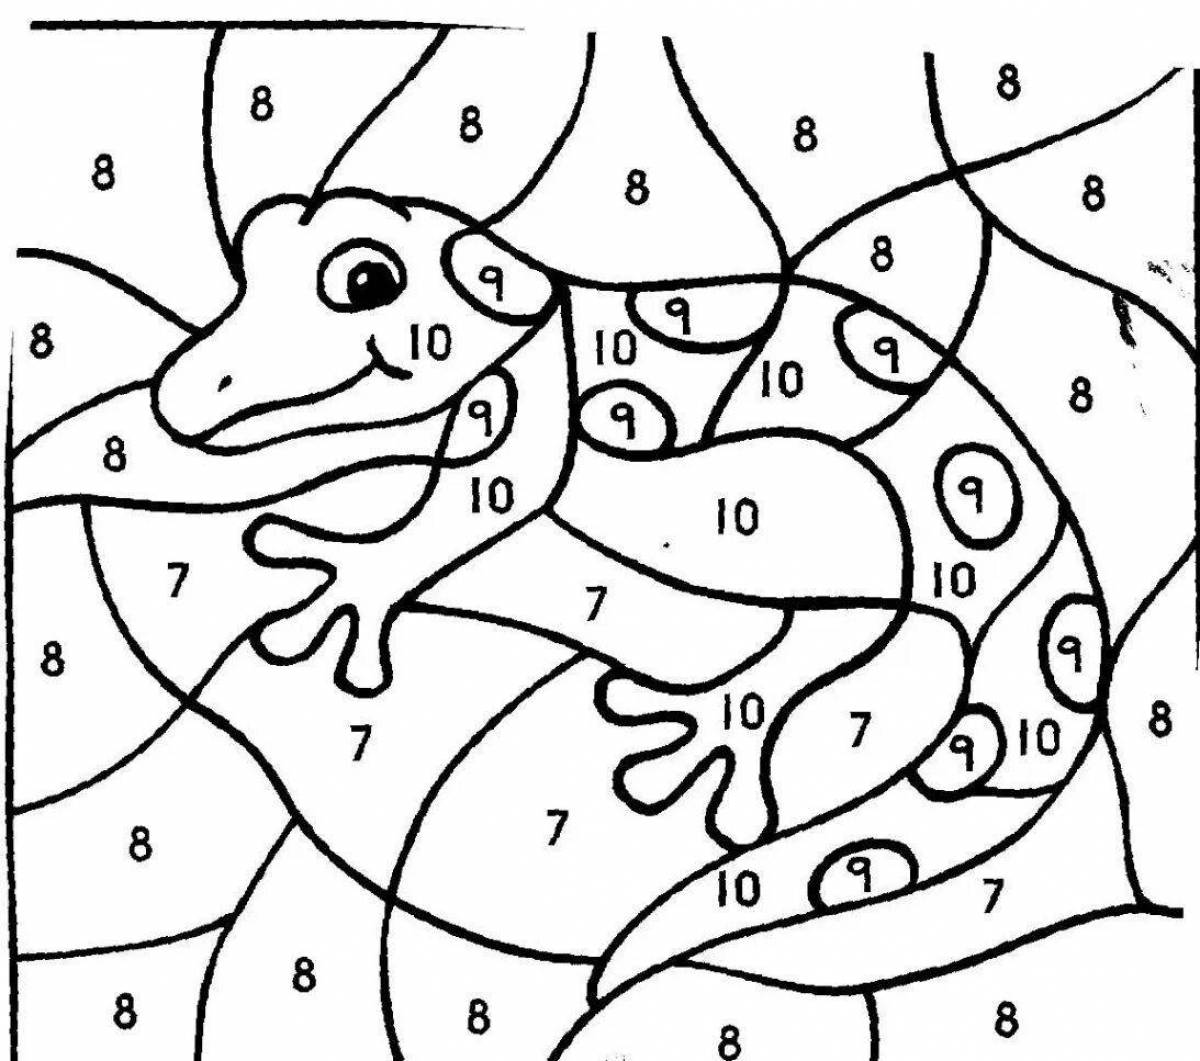 Coloring awesome snake by numbers